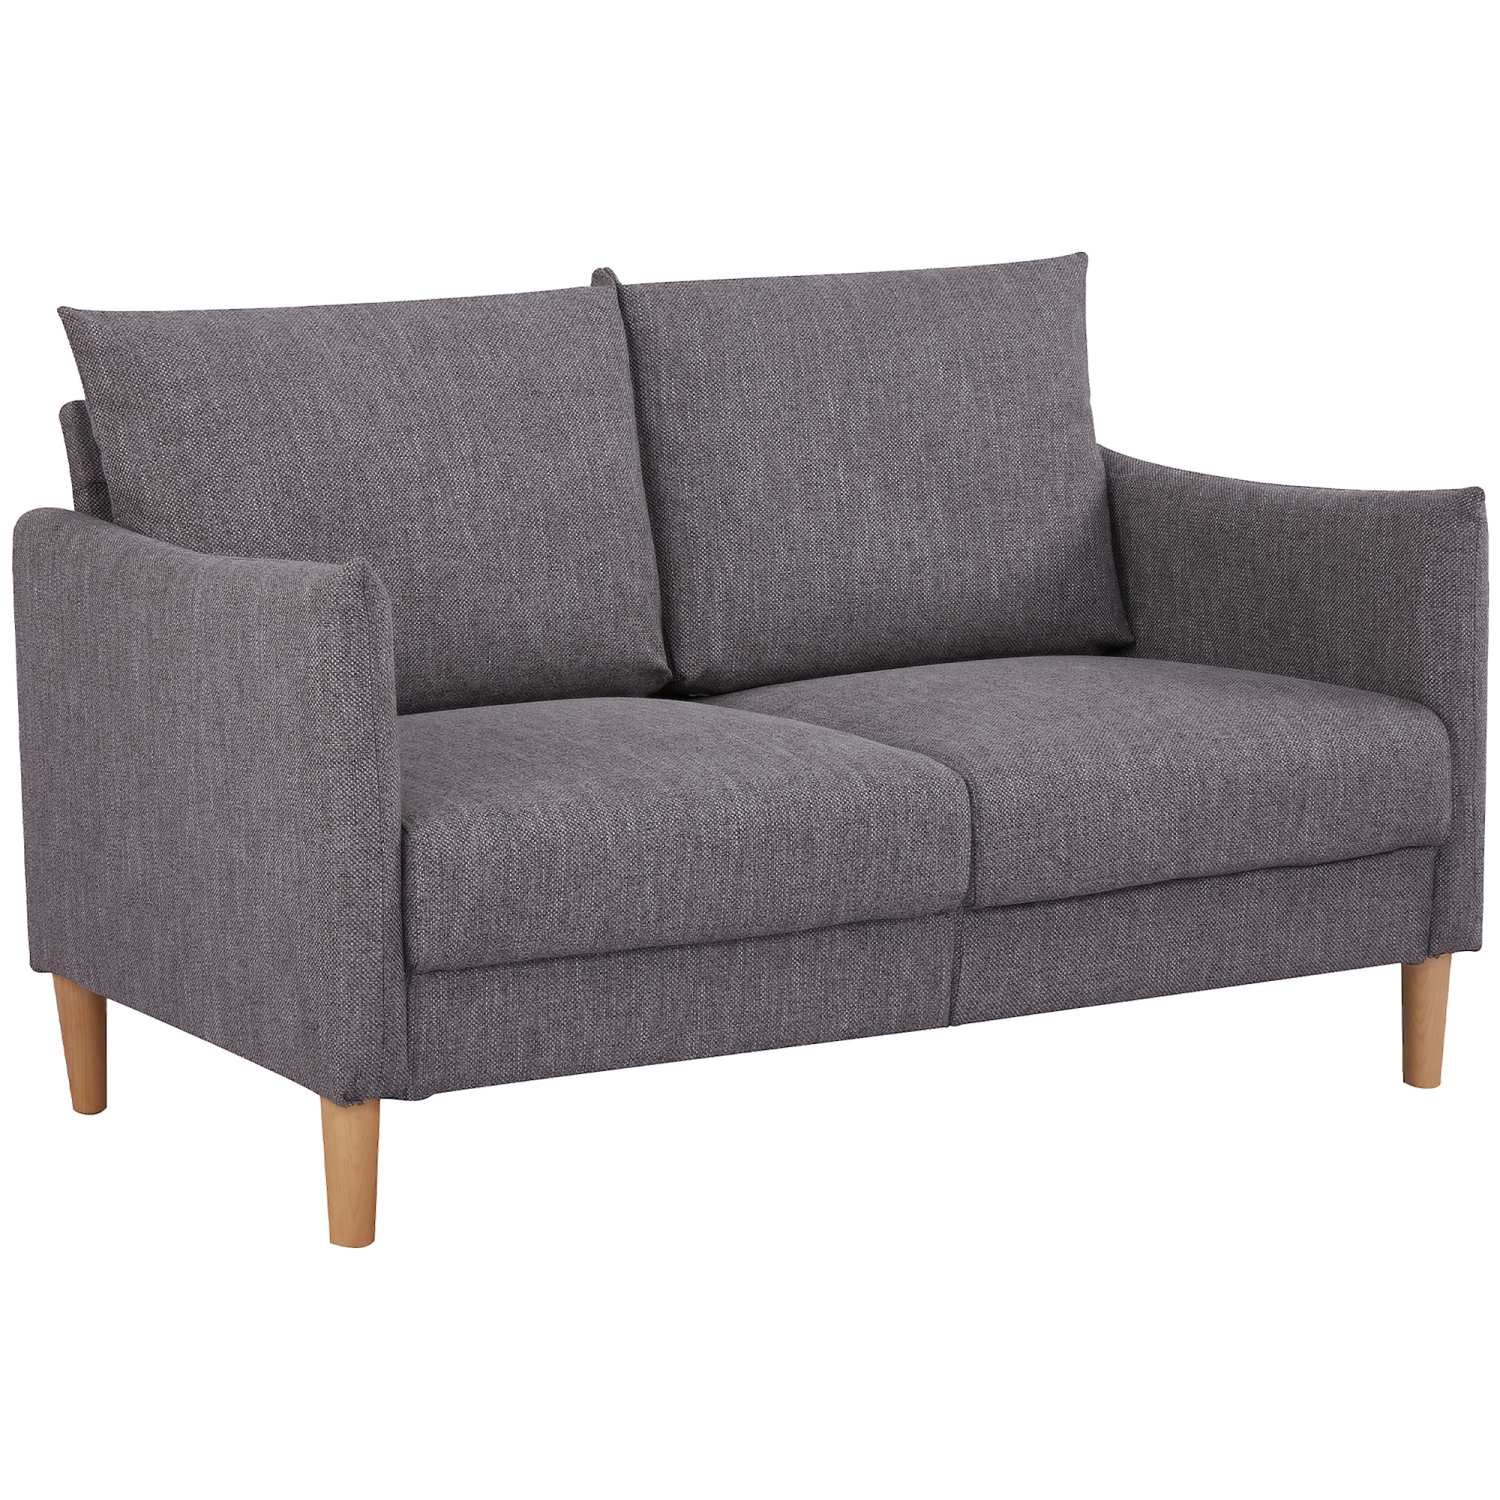 HOMCOM 54" Loveseat Sofa for Bedroom, Modern Love Seats Furniture, Upholstered Small Couch for Small Space, Dark Grey